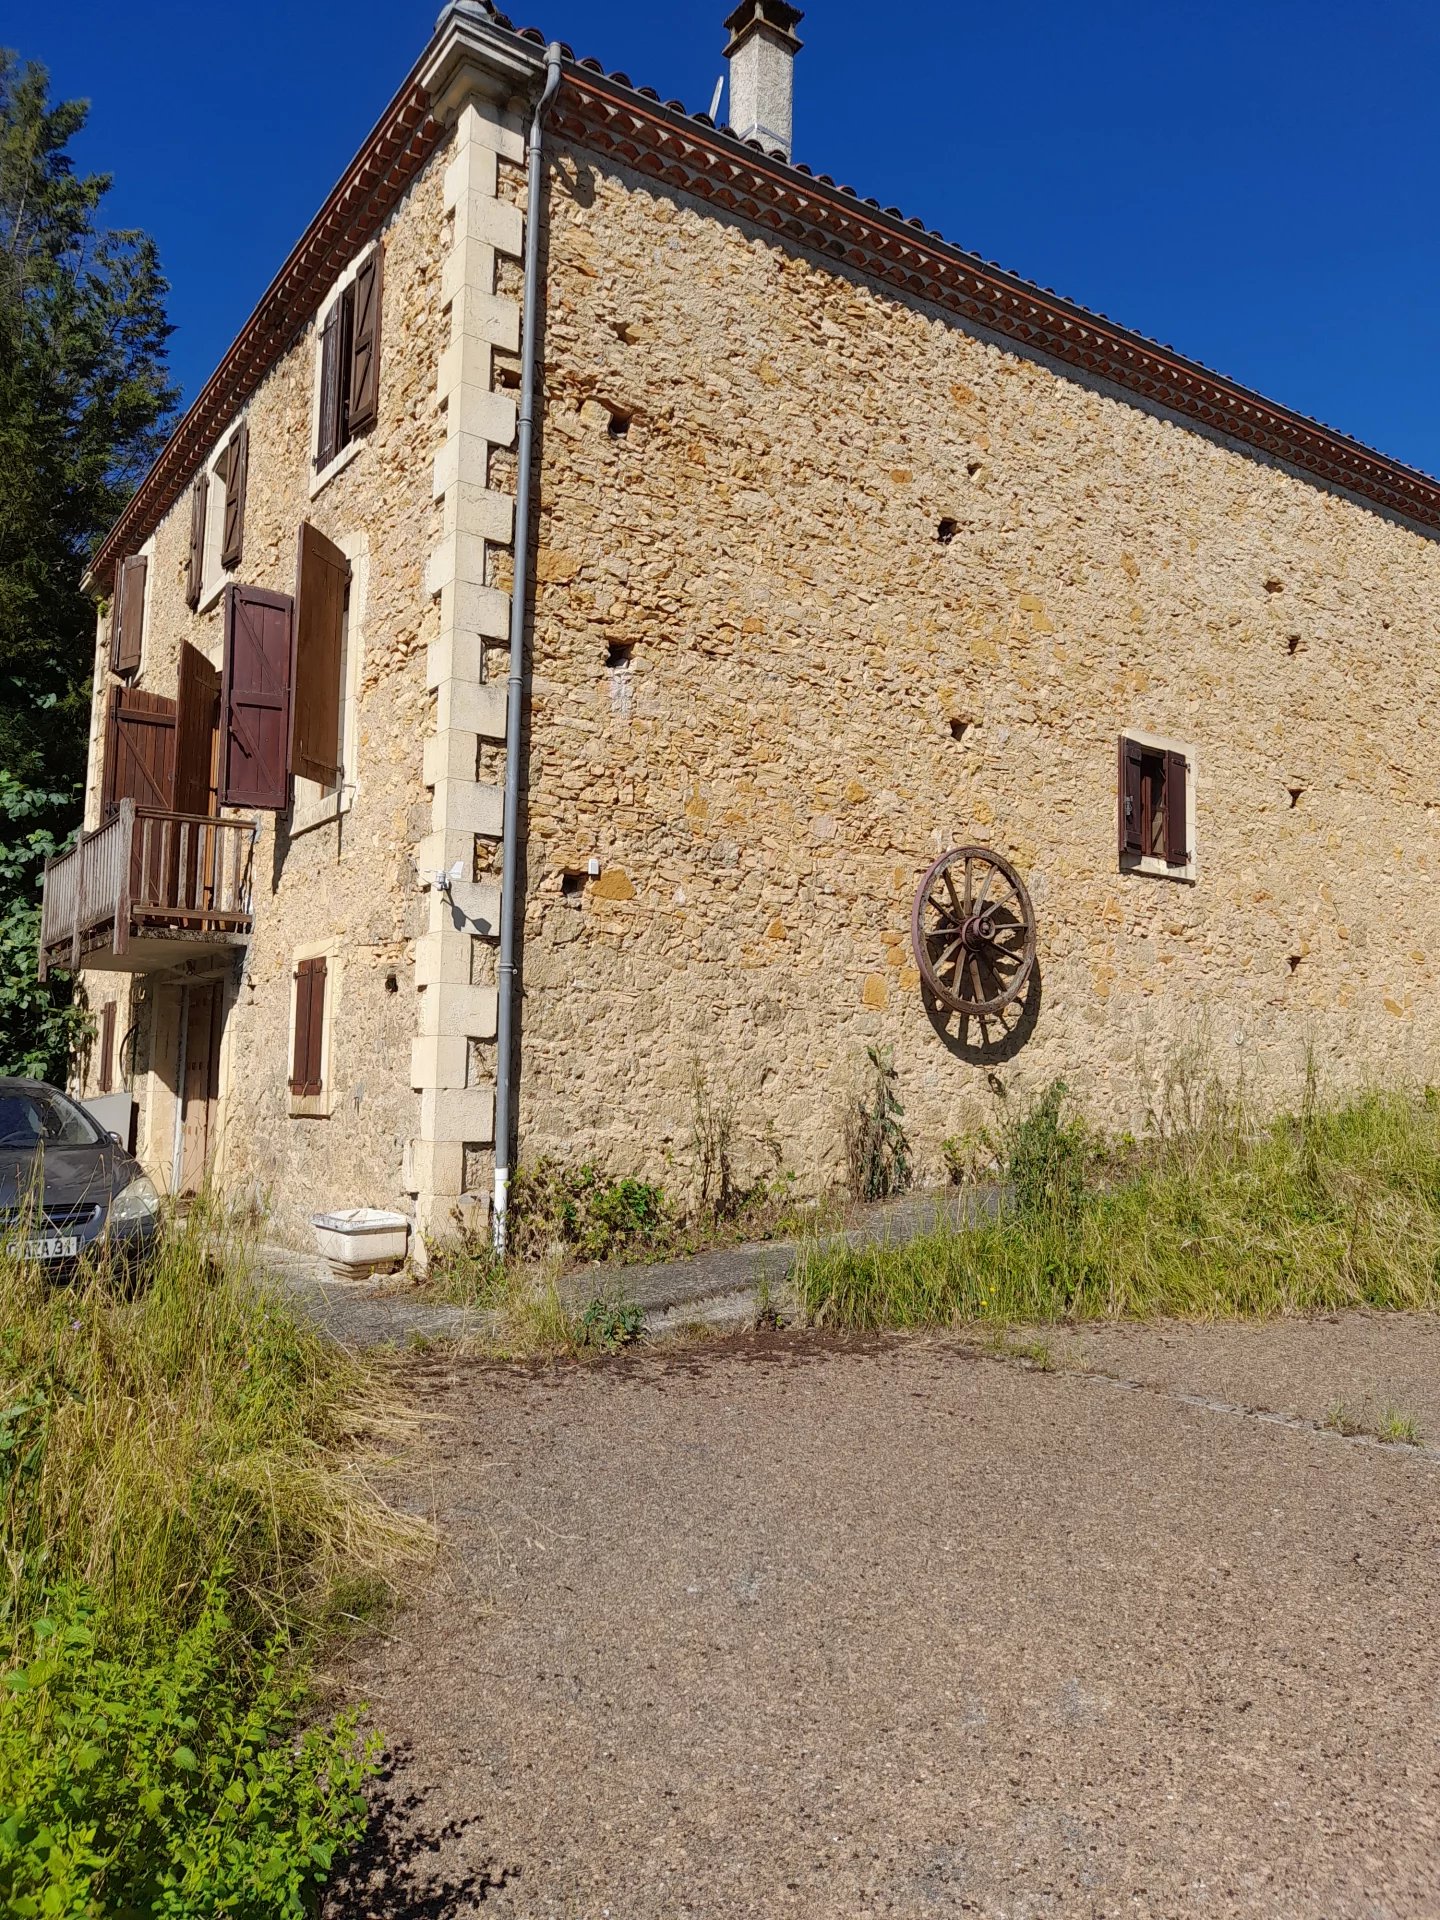 Near Aurignac, stone house on more than 1 hectare of land